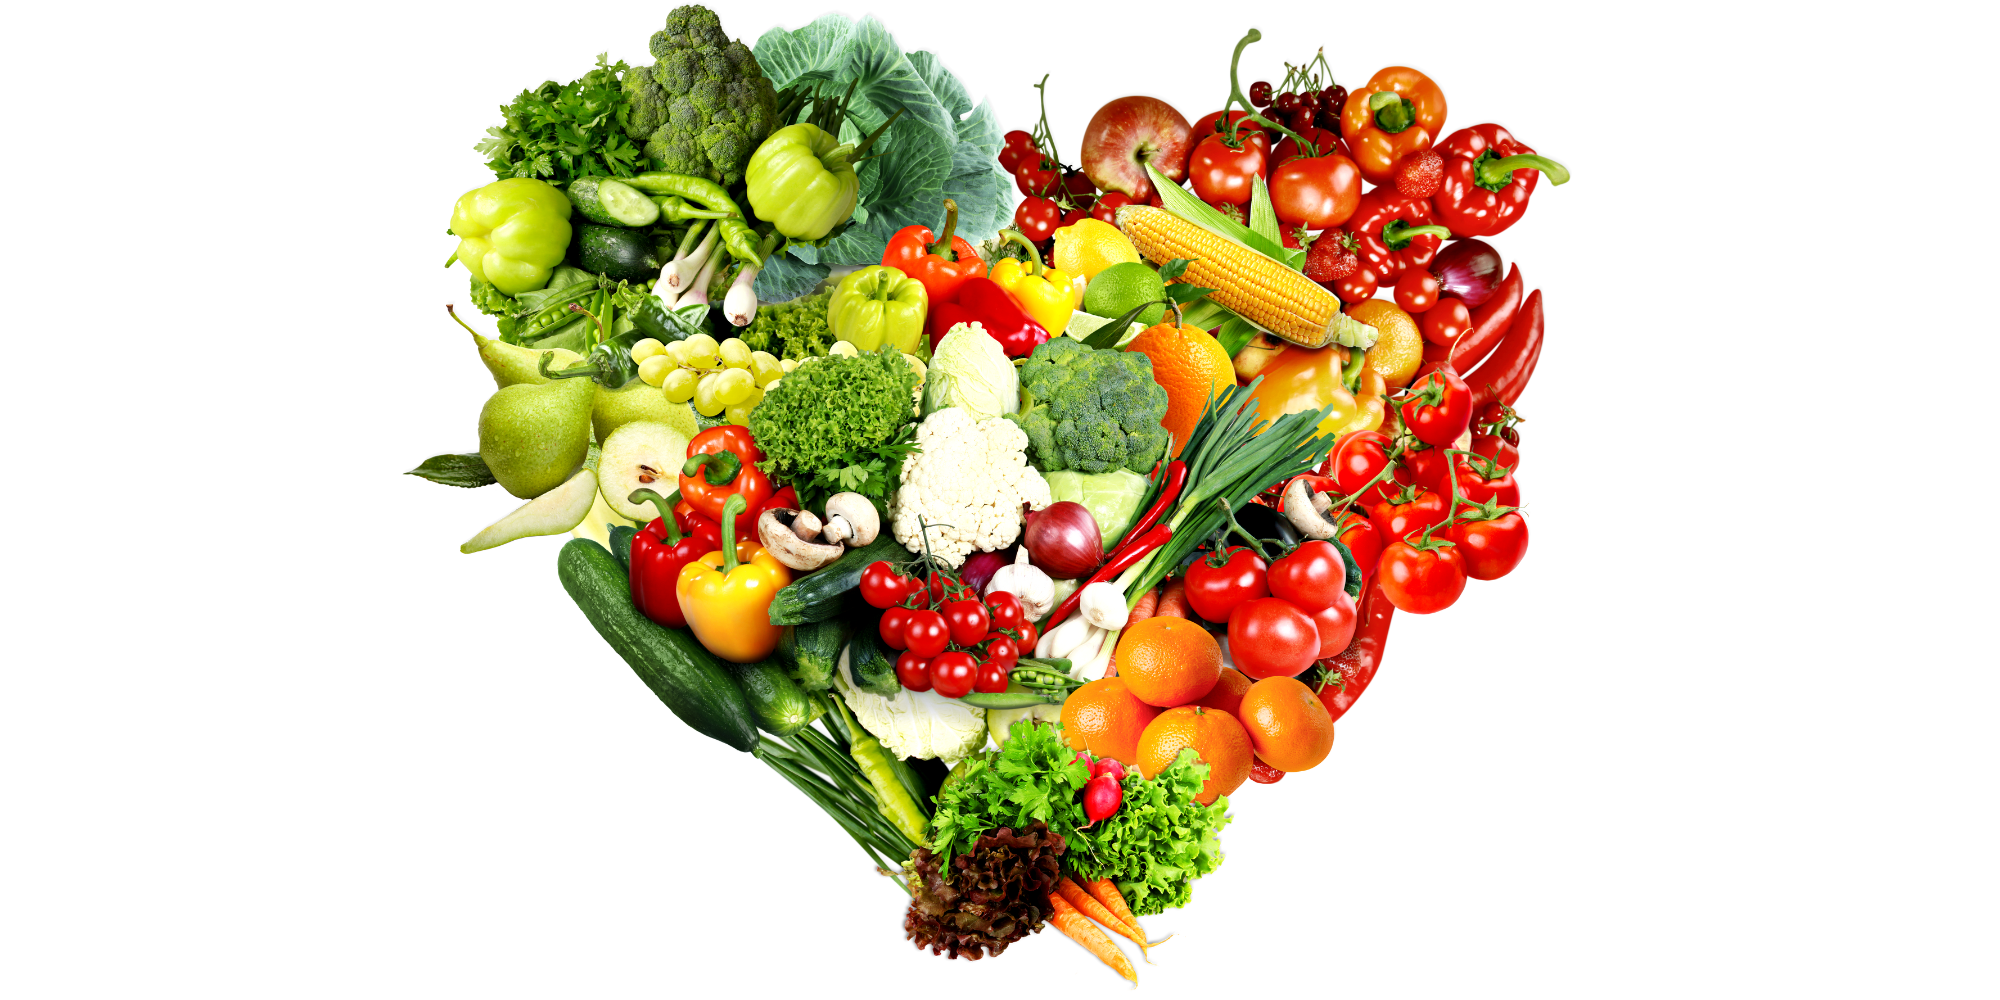 Fruits and Vegetables Image